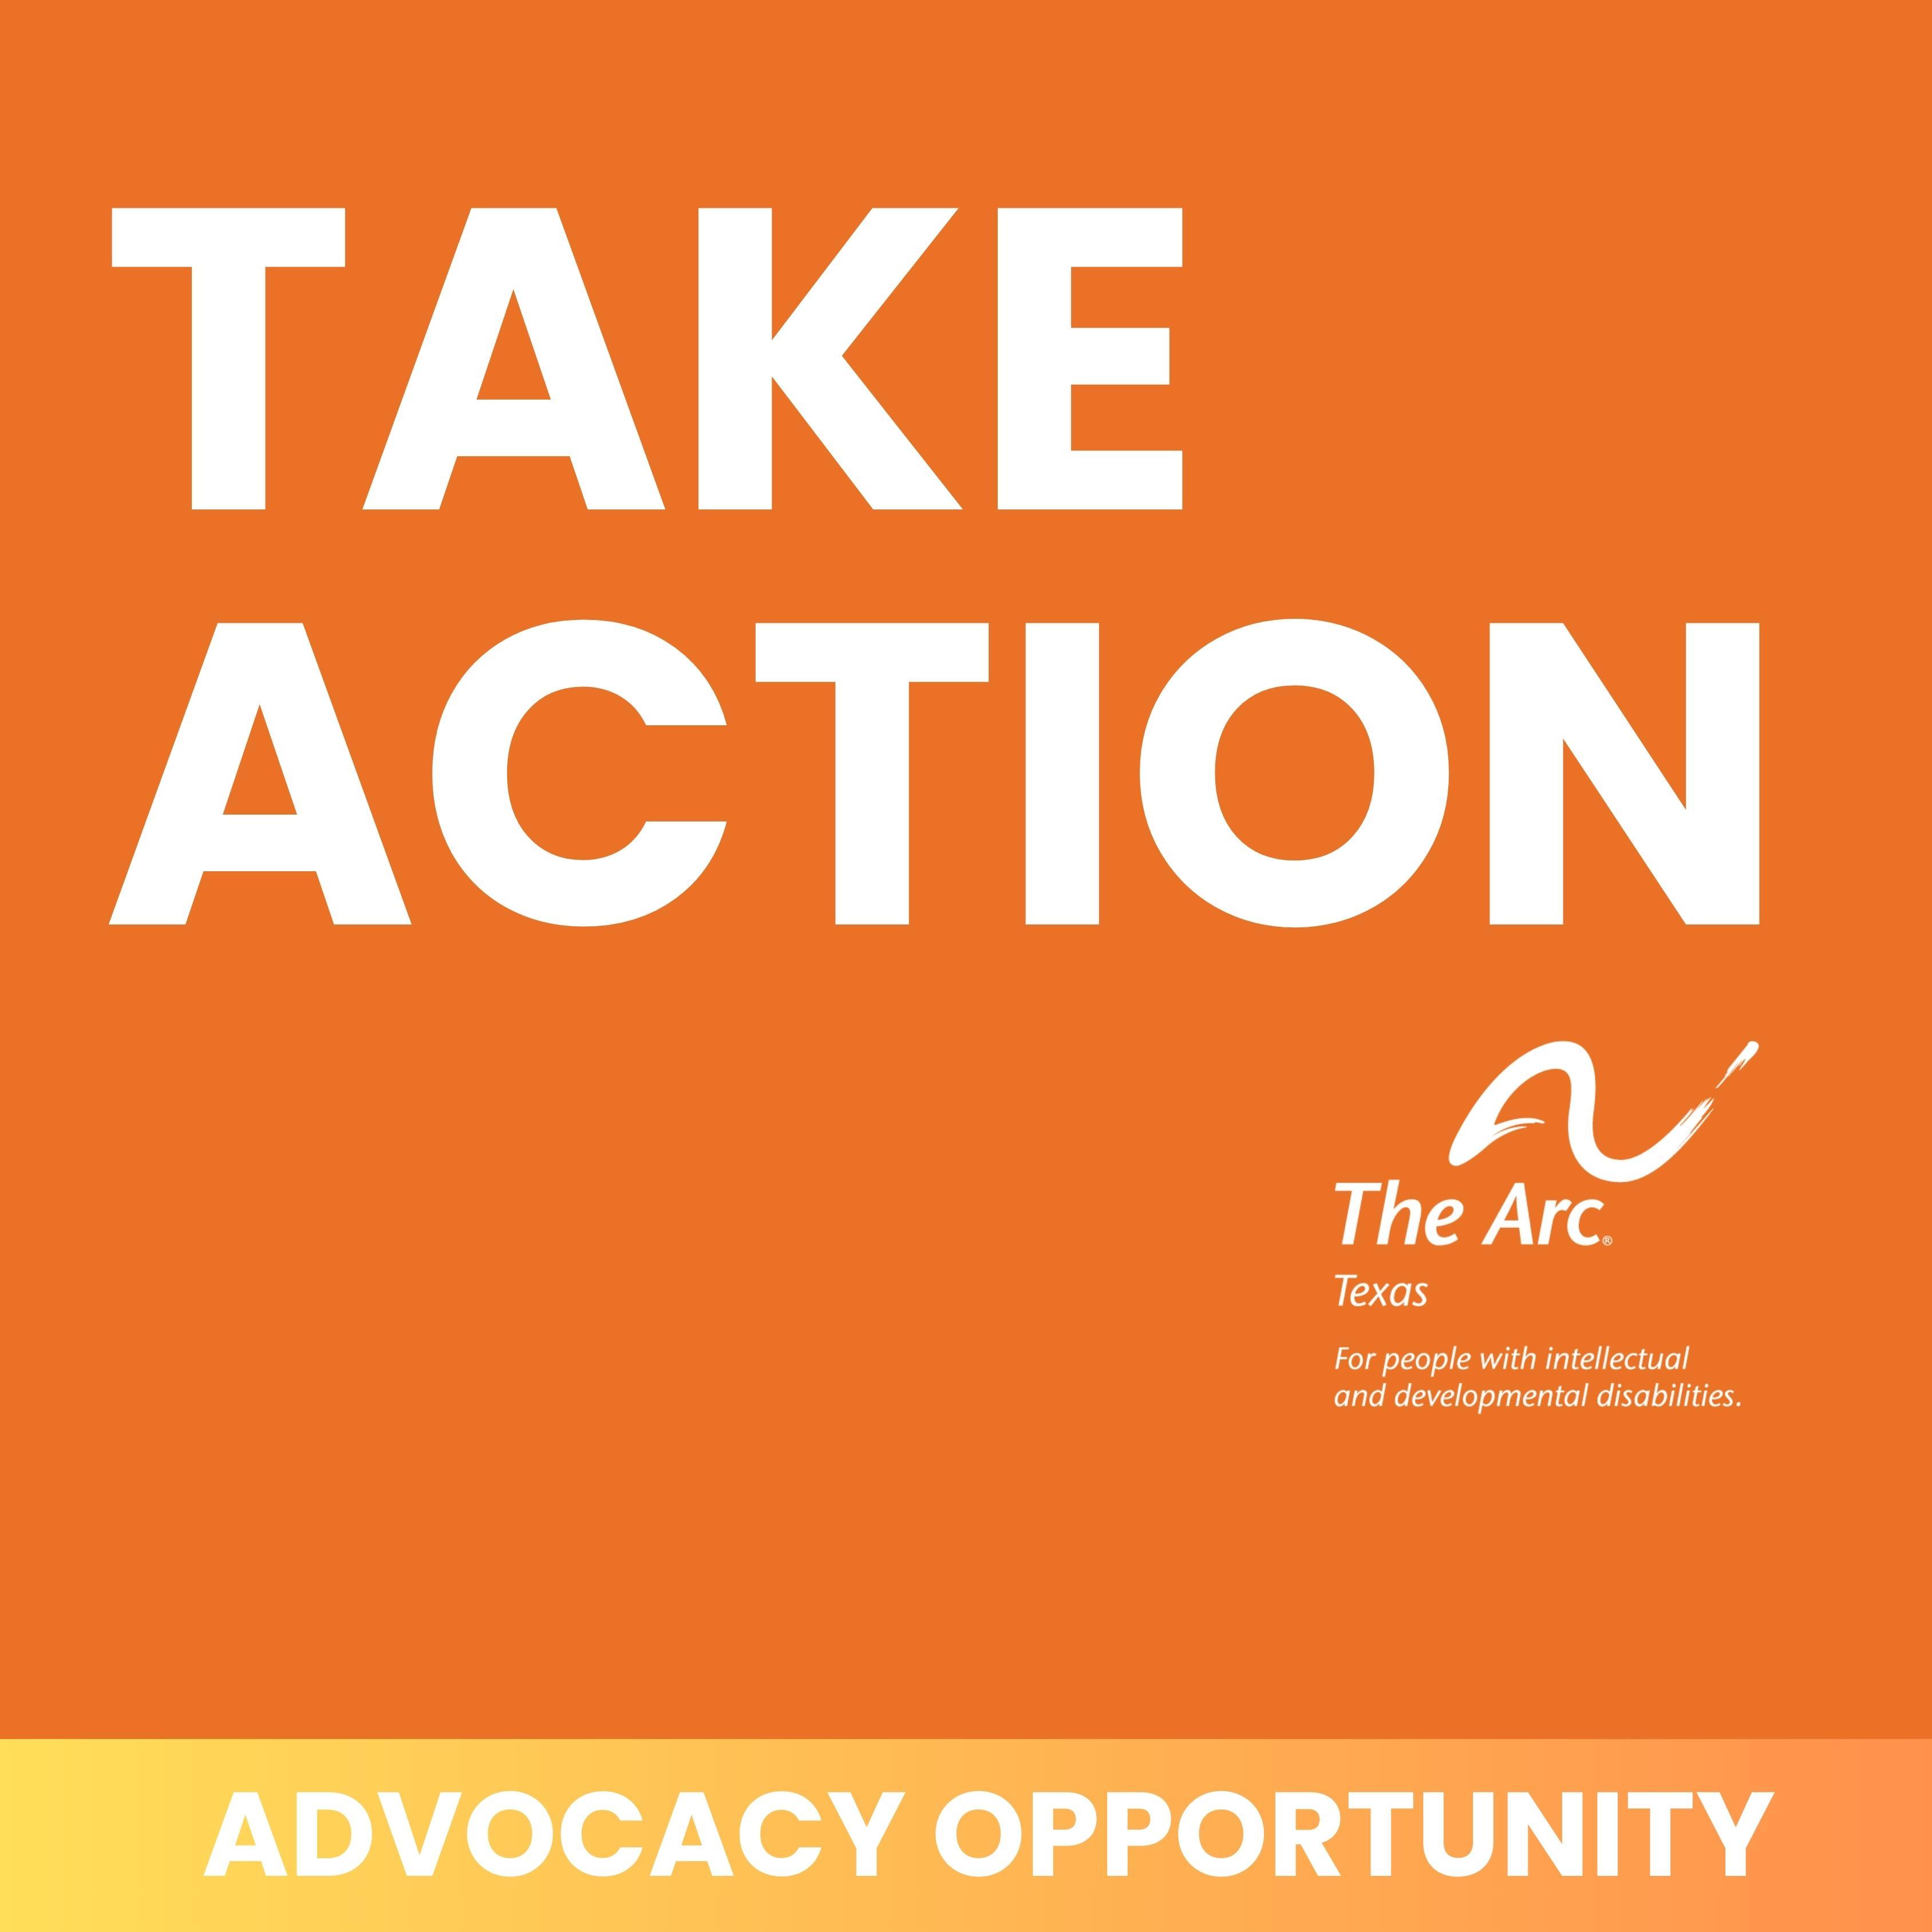 An orange background with white text says, "TAKE ACTION" and includes The Arc of Texas logo. A yellow bar at the bottom of the image says, "ADVOCACY OPPORTUNITY" in white text.